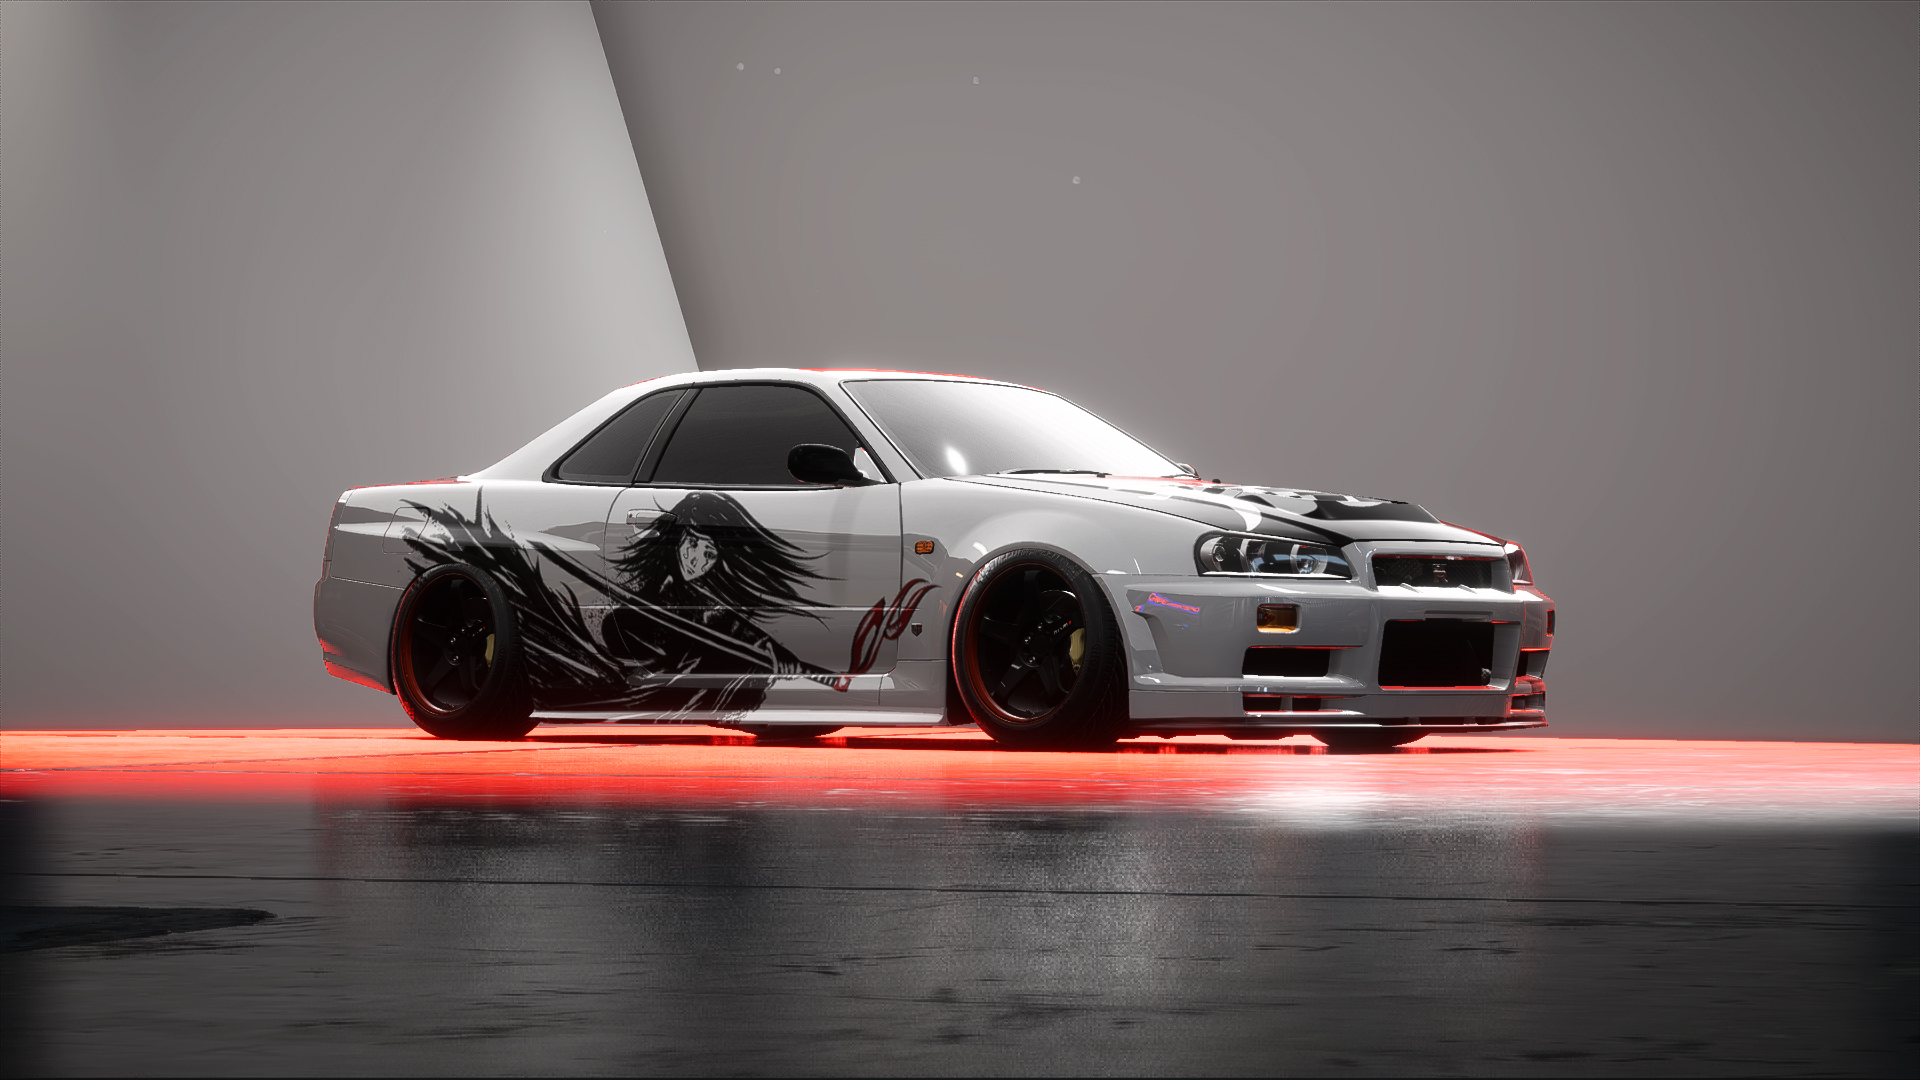 General 1920x1080 red Need for Speed car white black Nissan Nissan Skyline Nissan Skyline R34 Itasha Japanese cars coupe video games